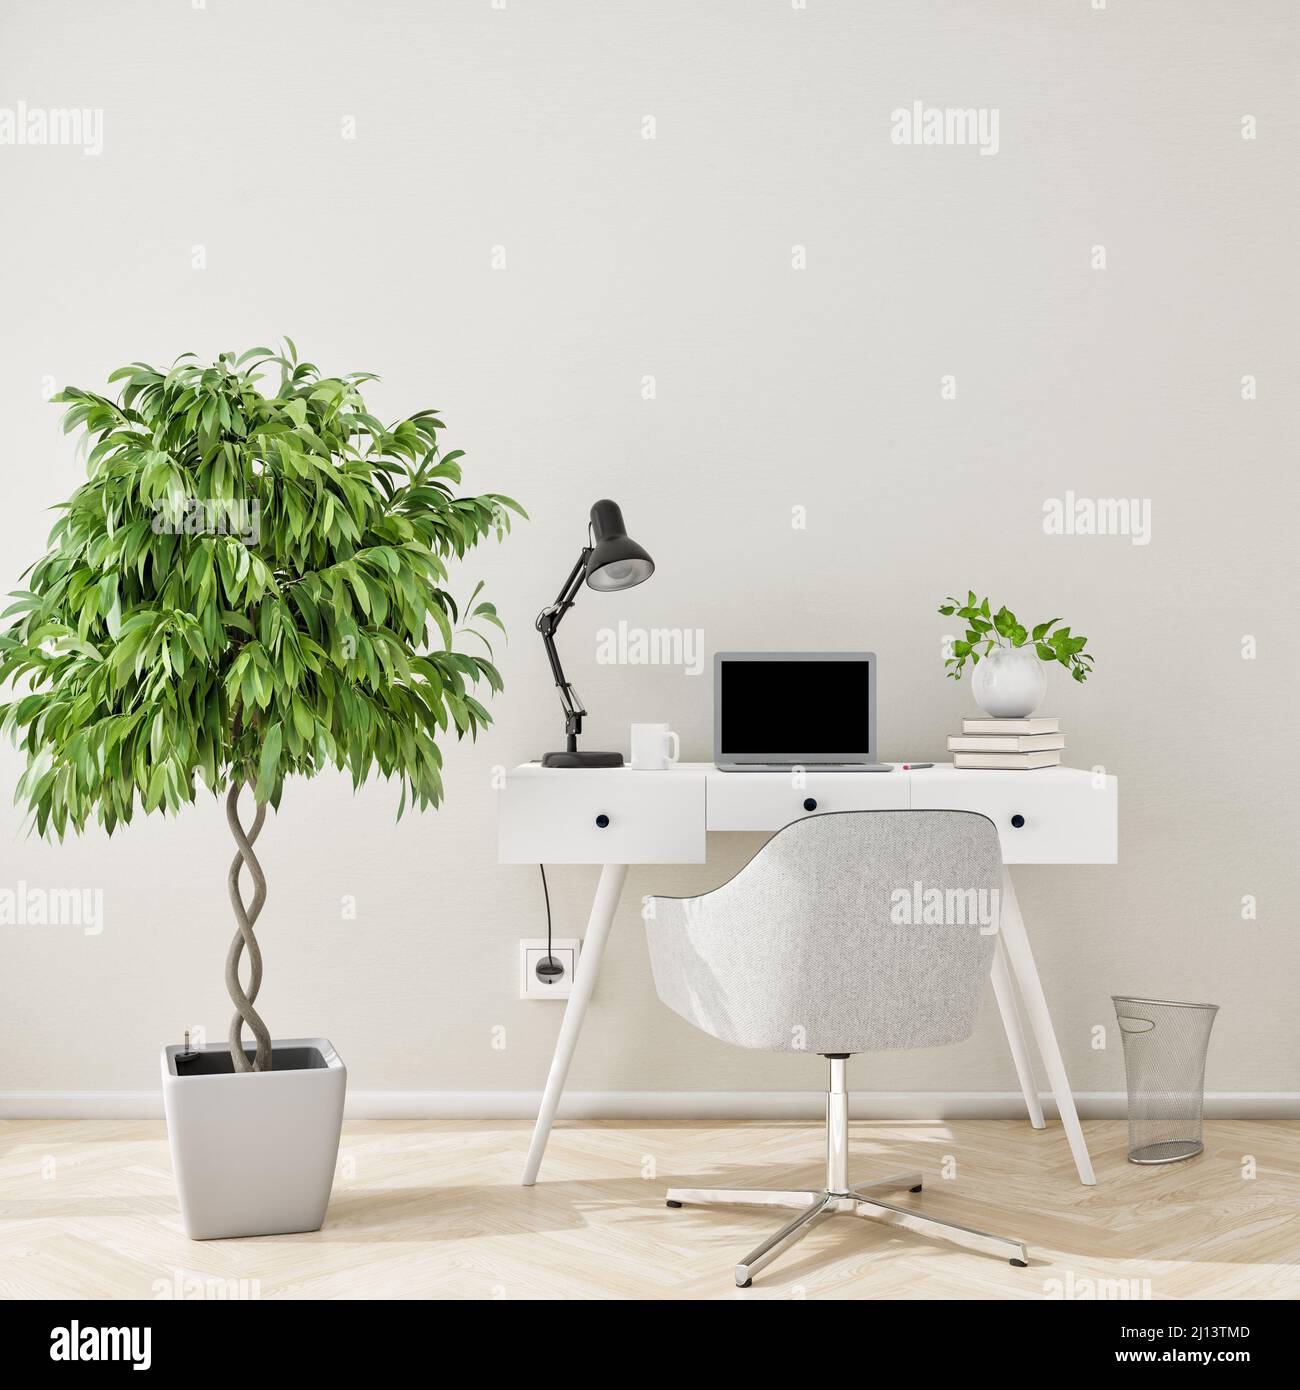 Mockup of a home office area with a beige structured wall, a writing desk, notebook, chair, wastebacket, desk lamp, books, coffee mug and a fig tree. Stock Photo